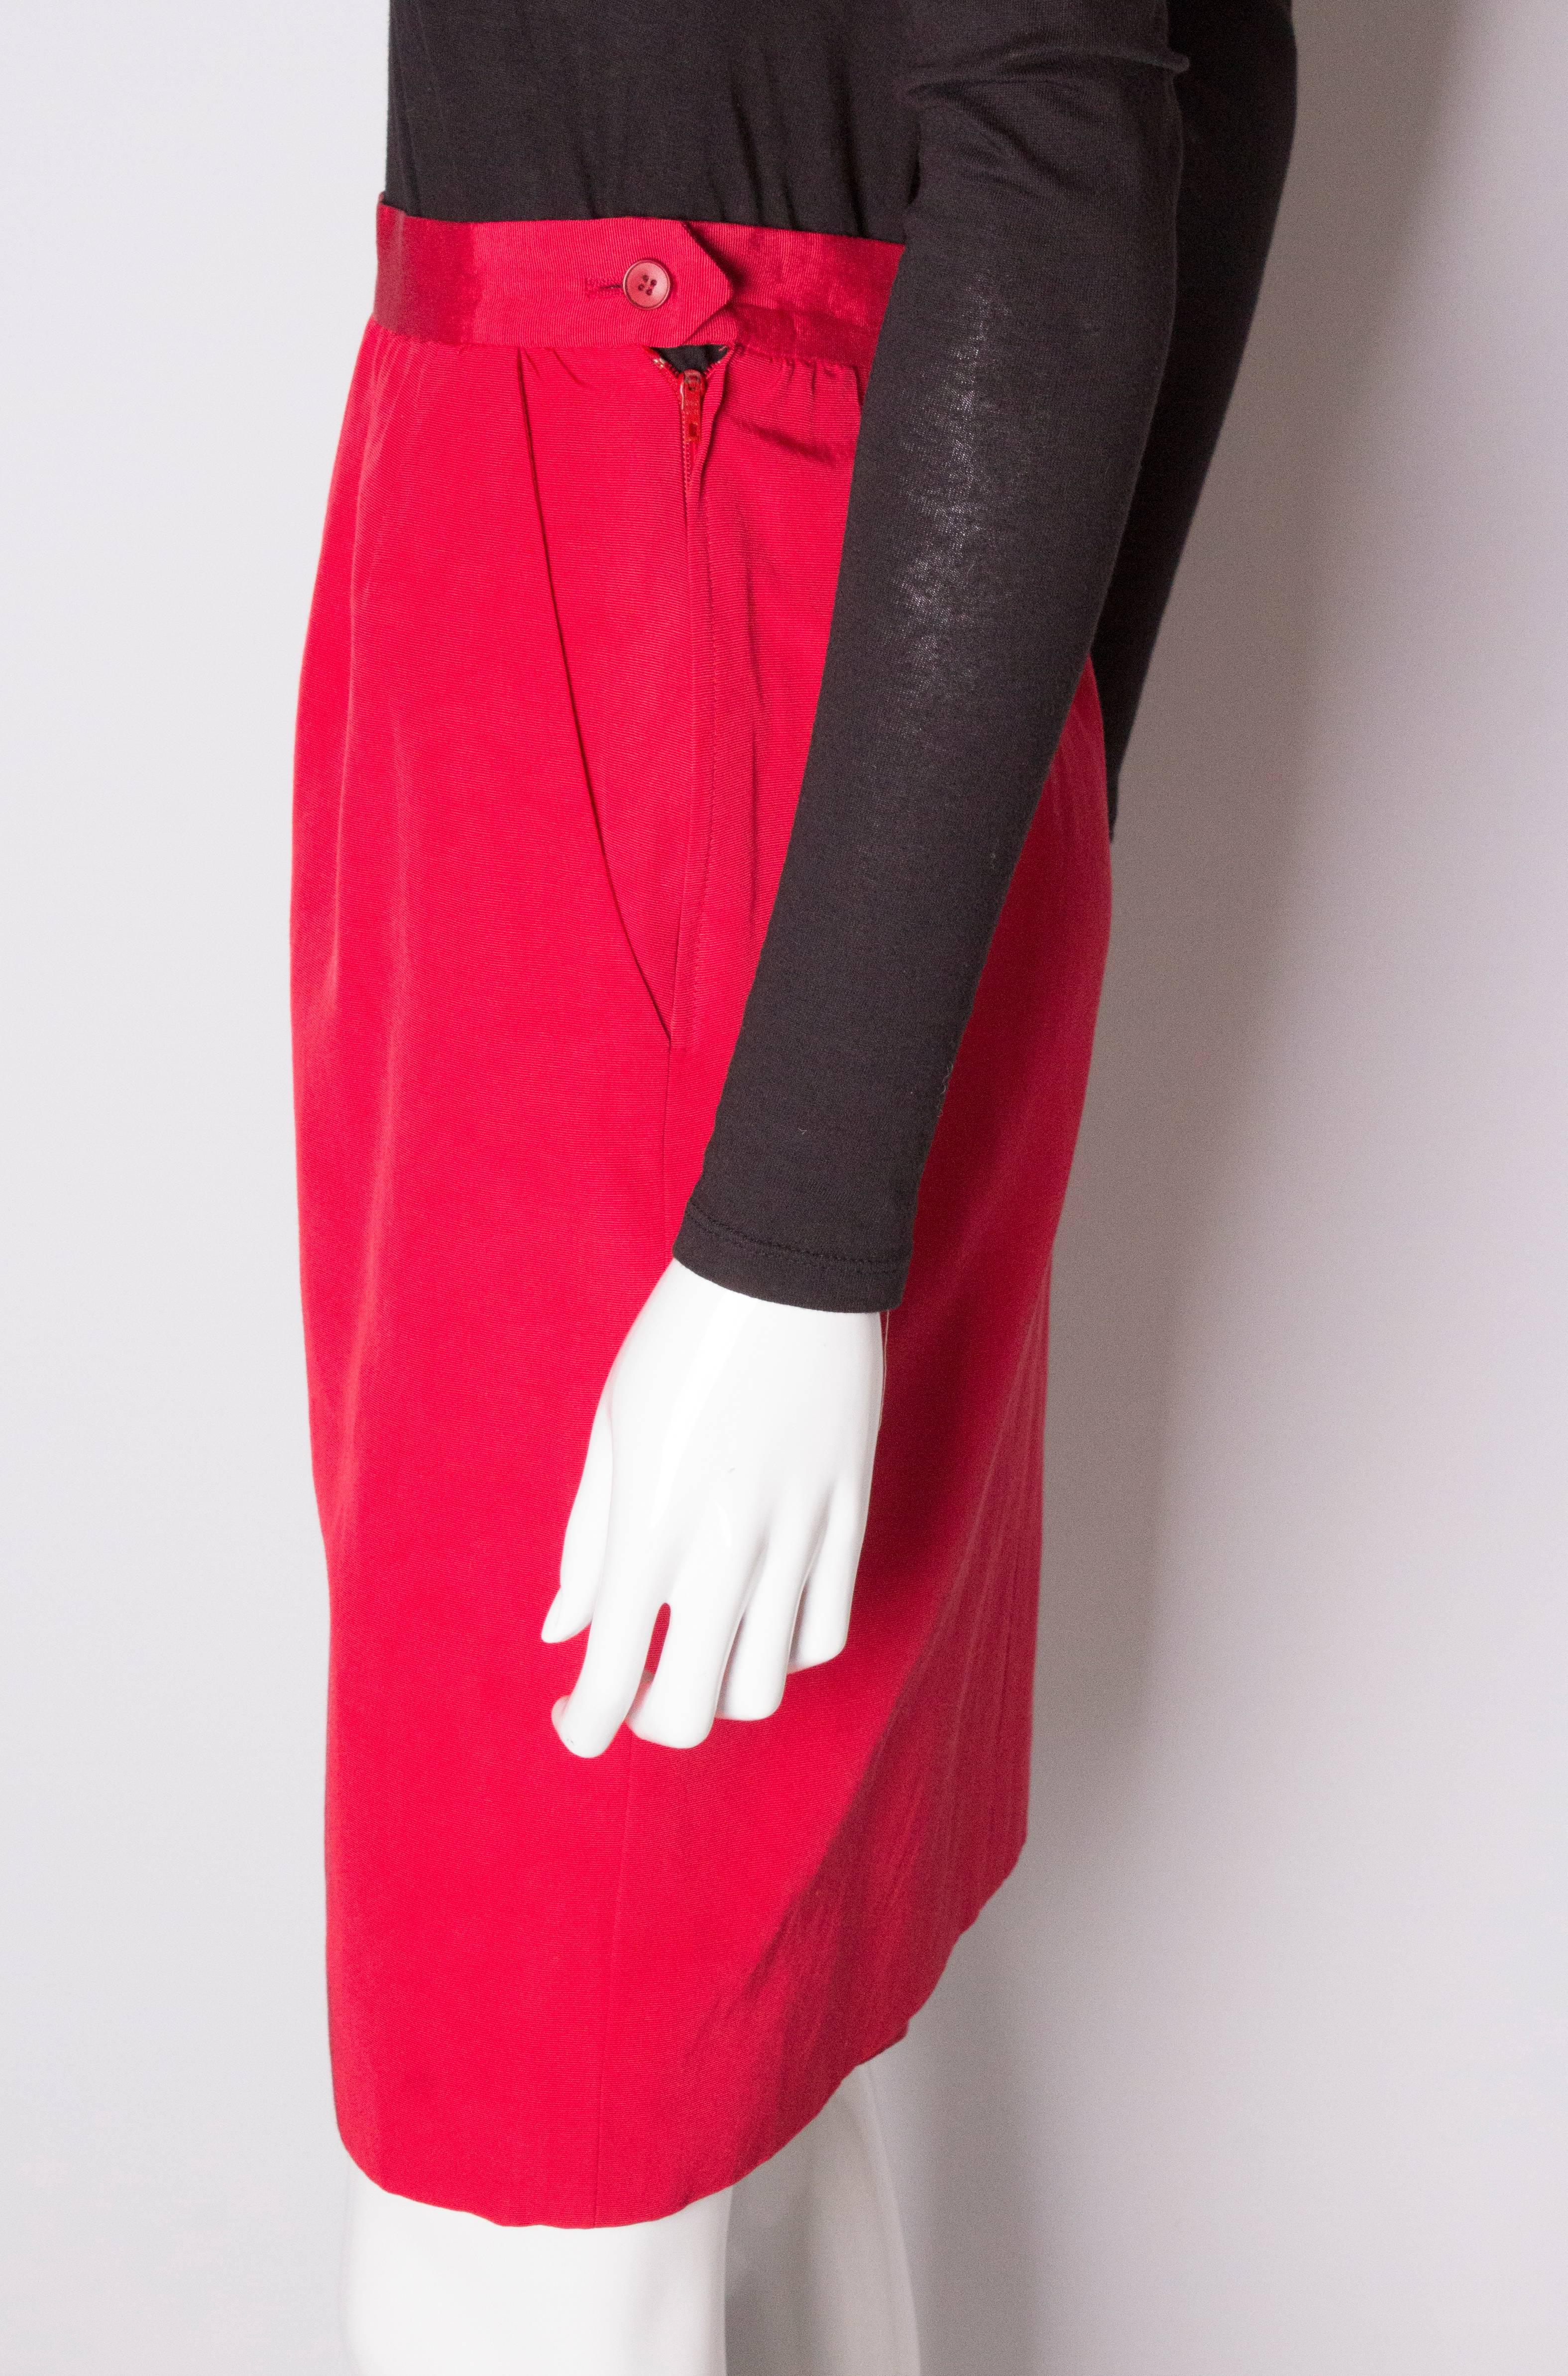 Vintage Yves Saint Laurent, Rive Gauche Vintage Red Skirt In Good Condition For Sale In London, GB